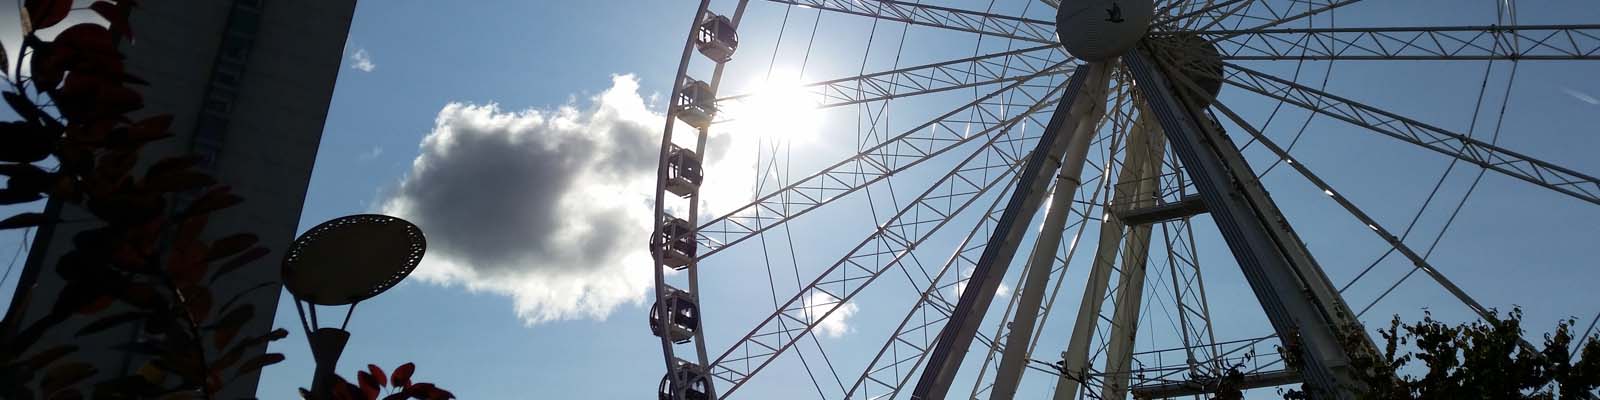 This is an image of a large ferris wheel in Manchester. ASTA-USA provides professional translation services in this city.